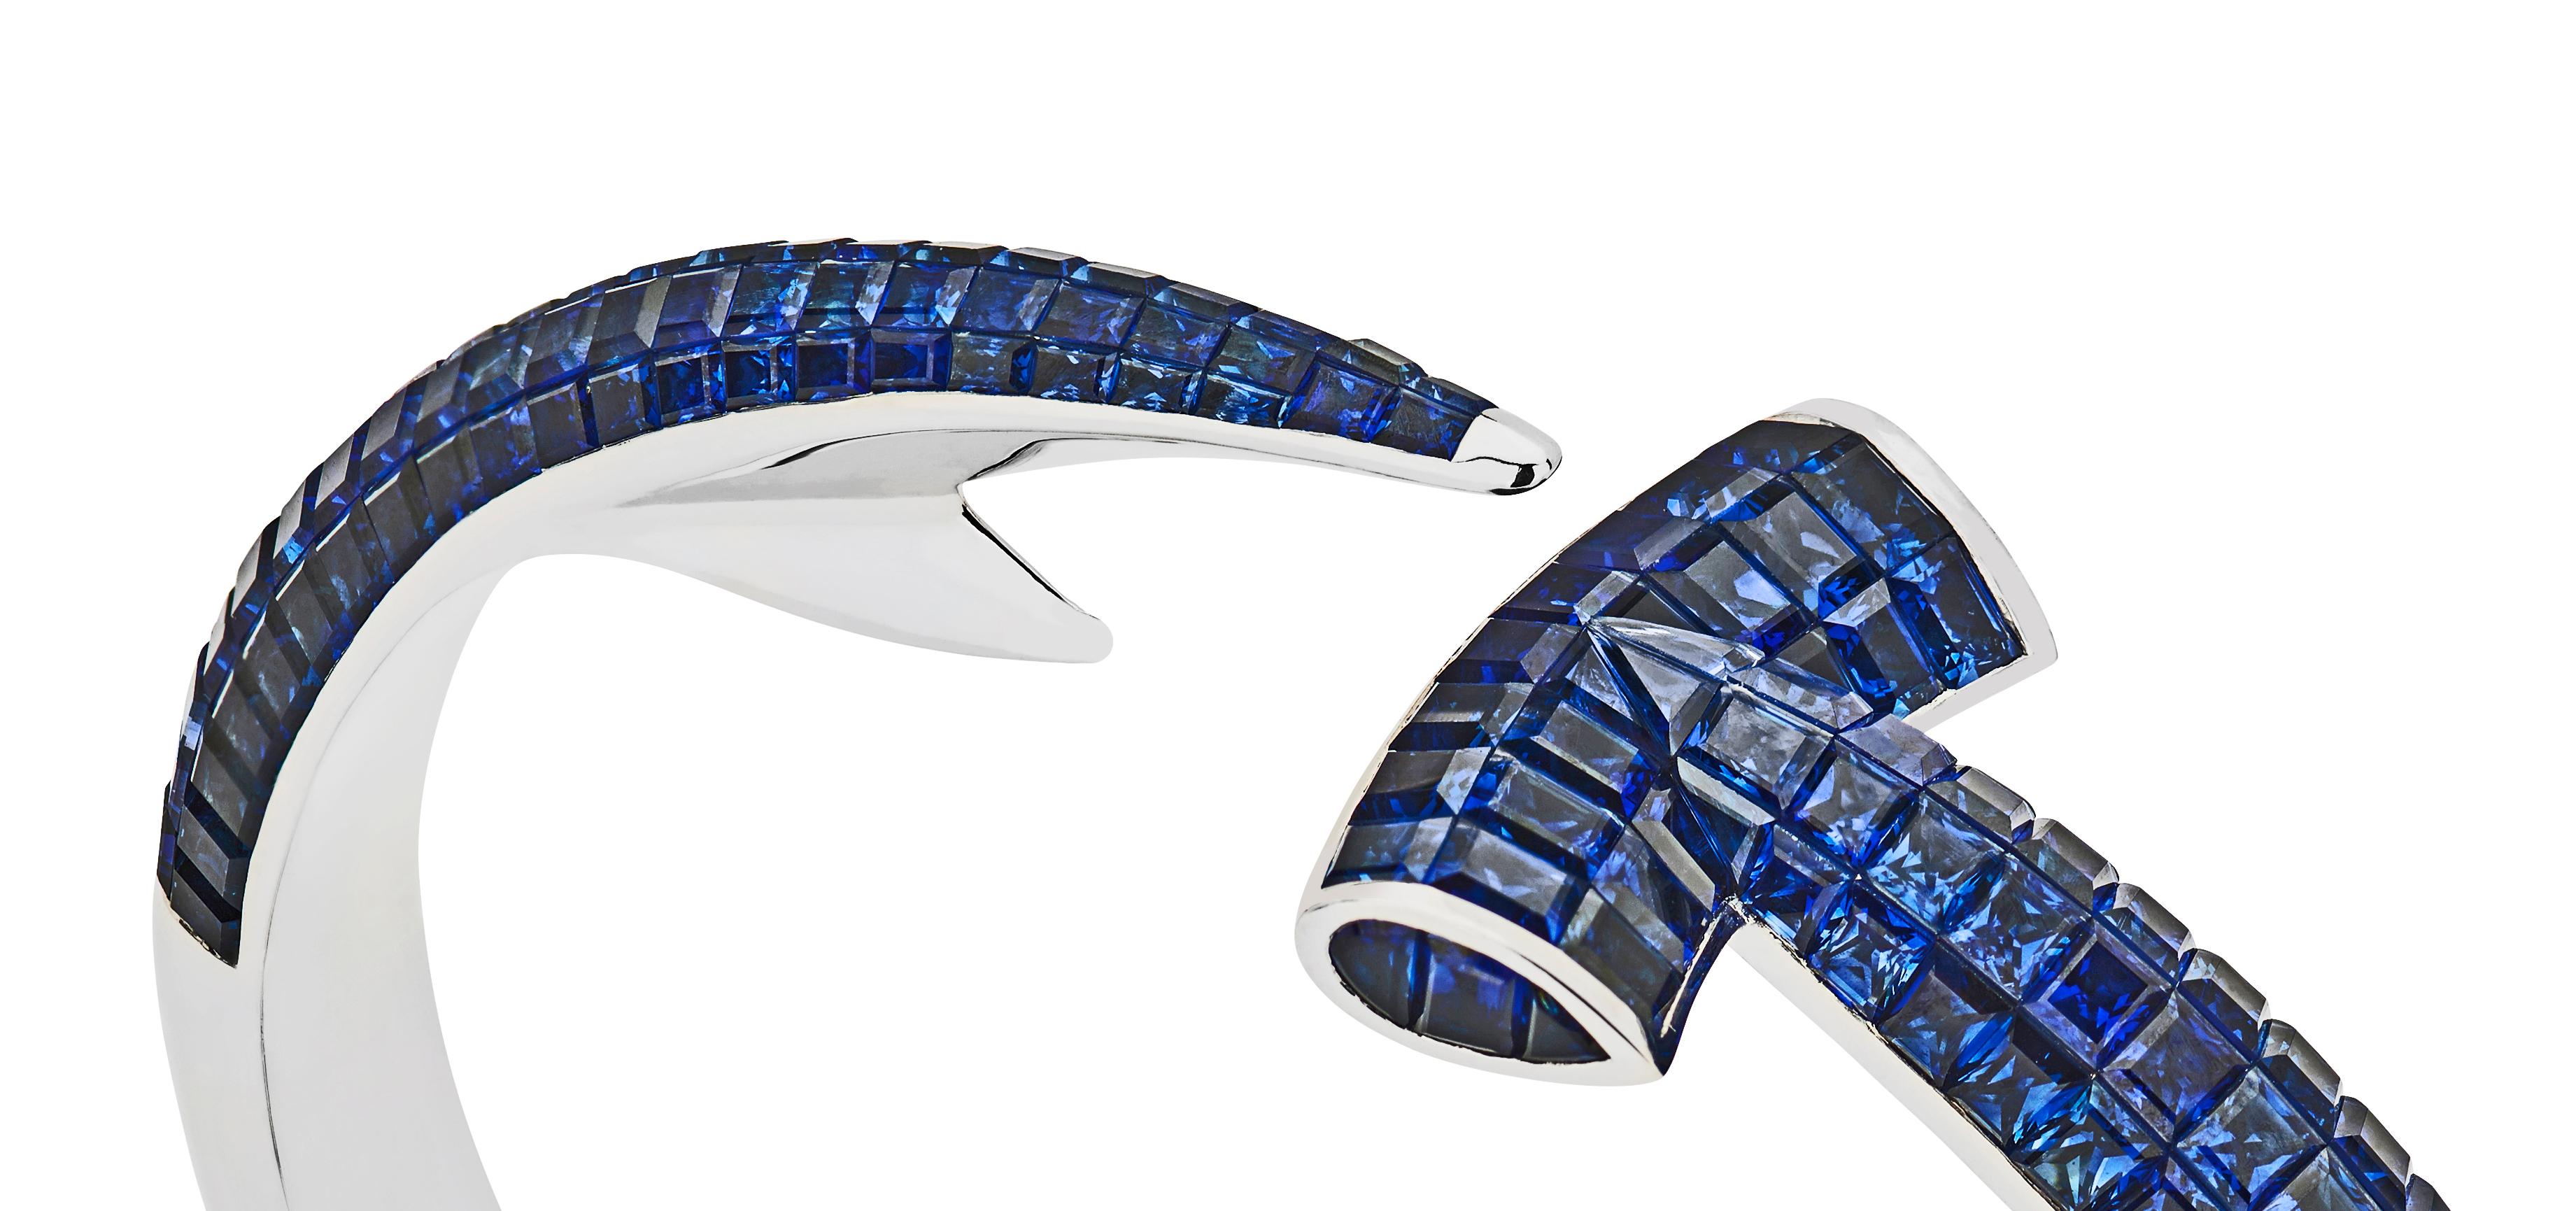 Dive for precious bounty with the Hammerhead Sapphire Bangle. The Hammerhead sapphire bangle combines Webster's love of the aquatic with a sleek silhouette and intricate gem setting.

Hand crafted in 18 karat white gold and completed with square cut